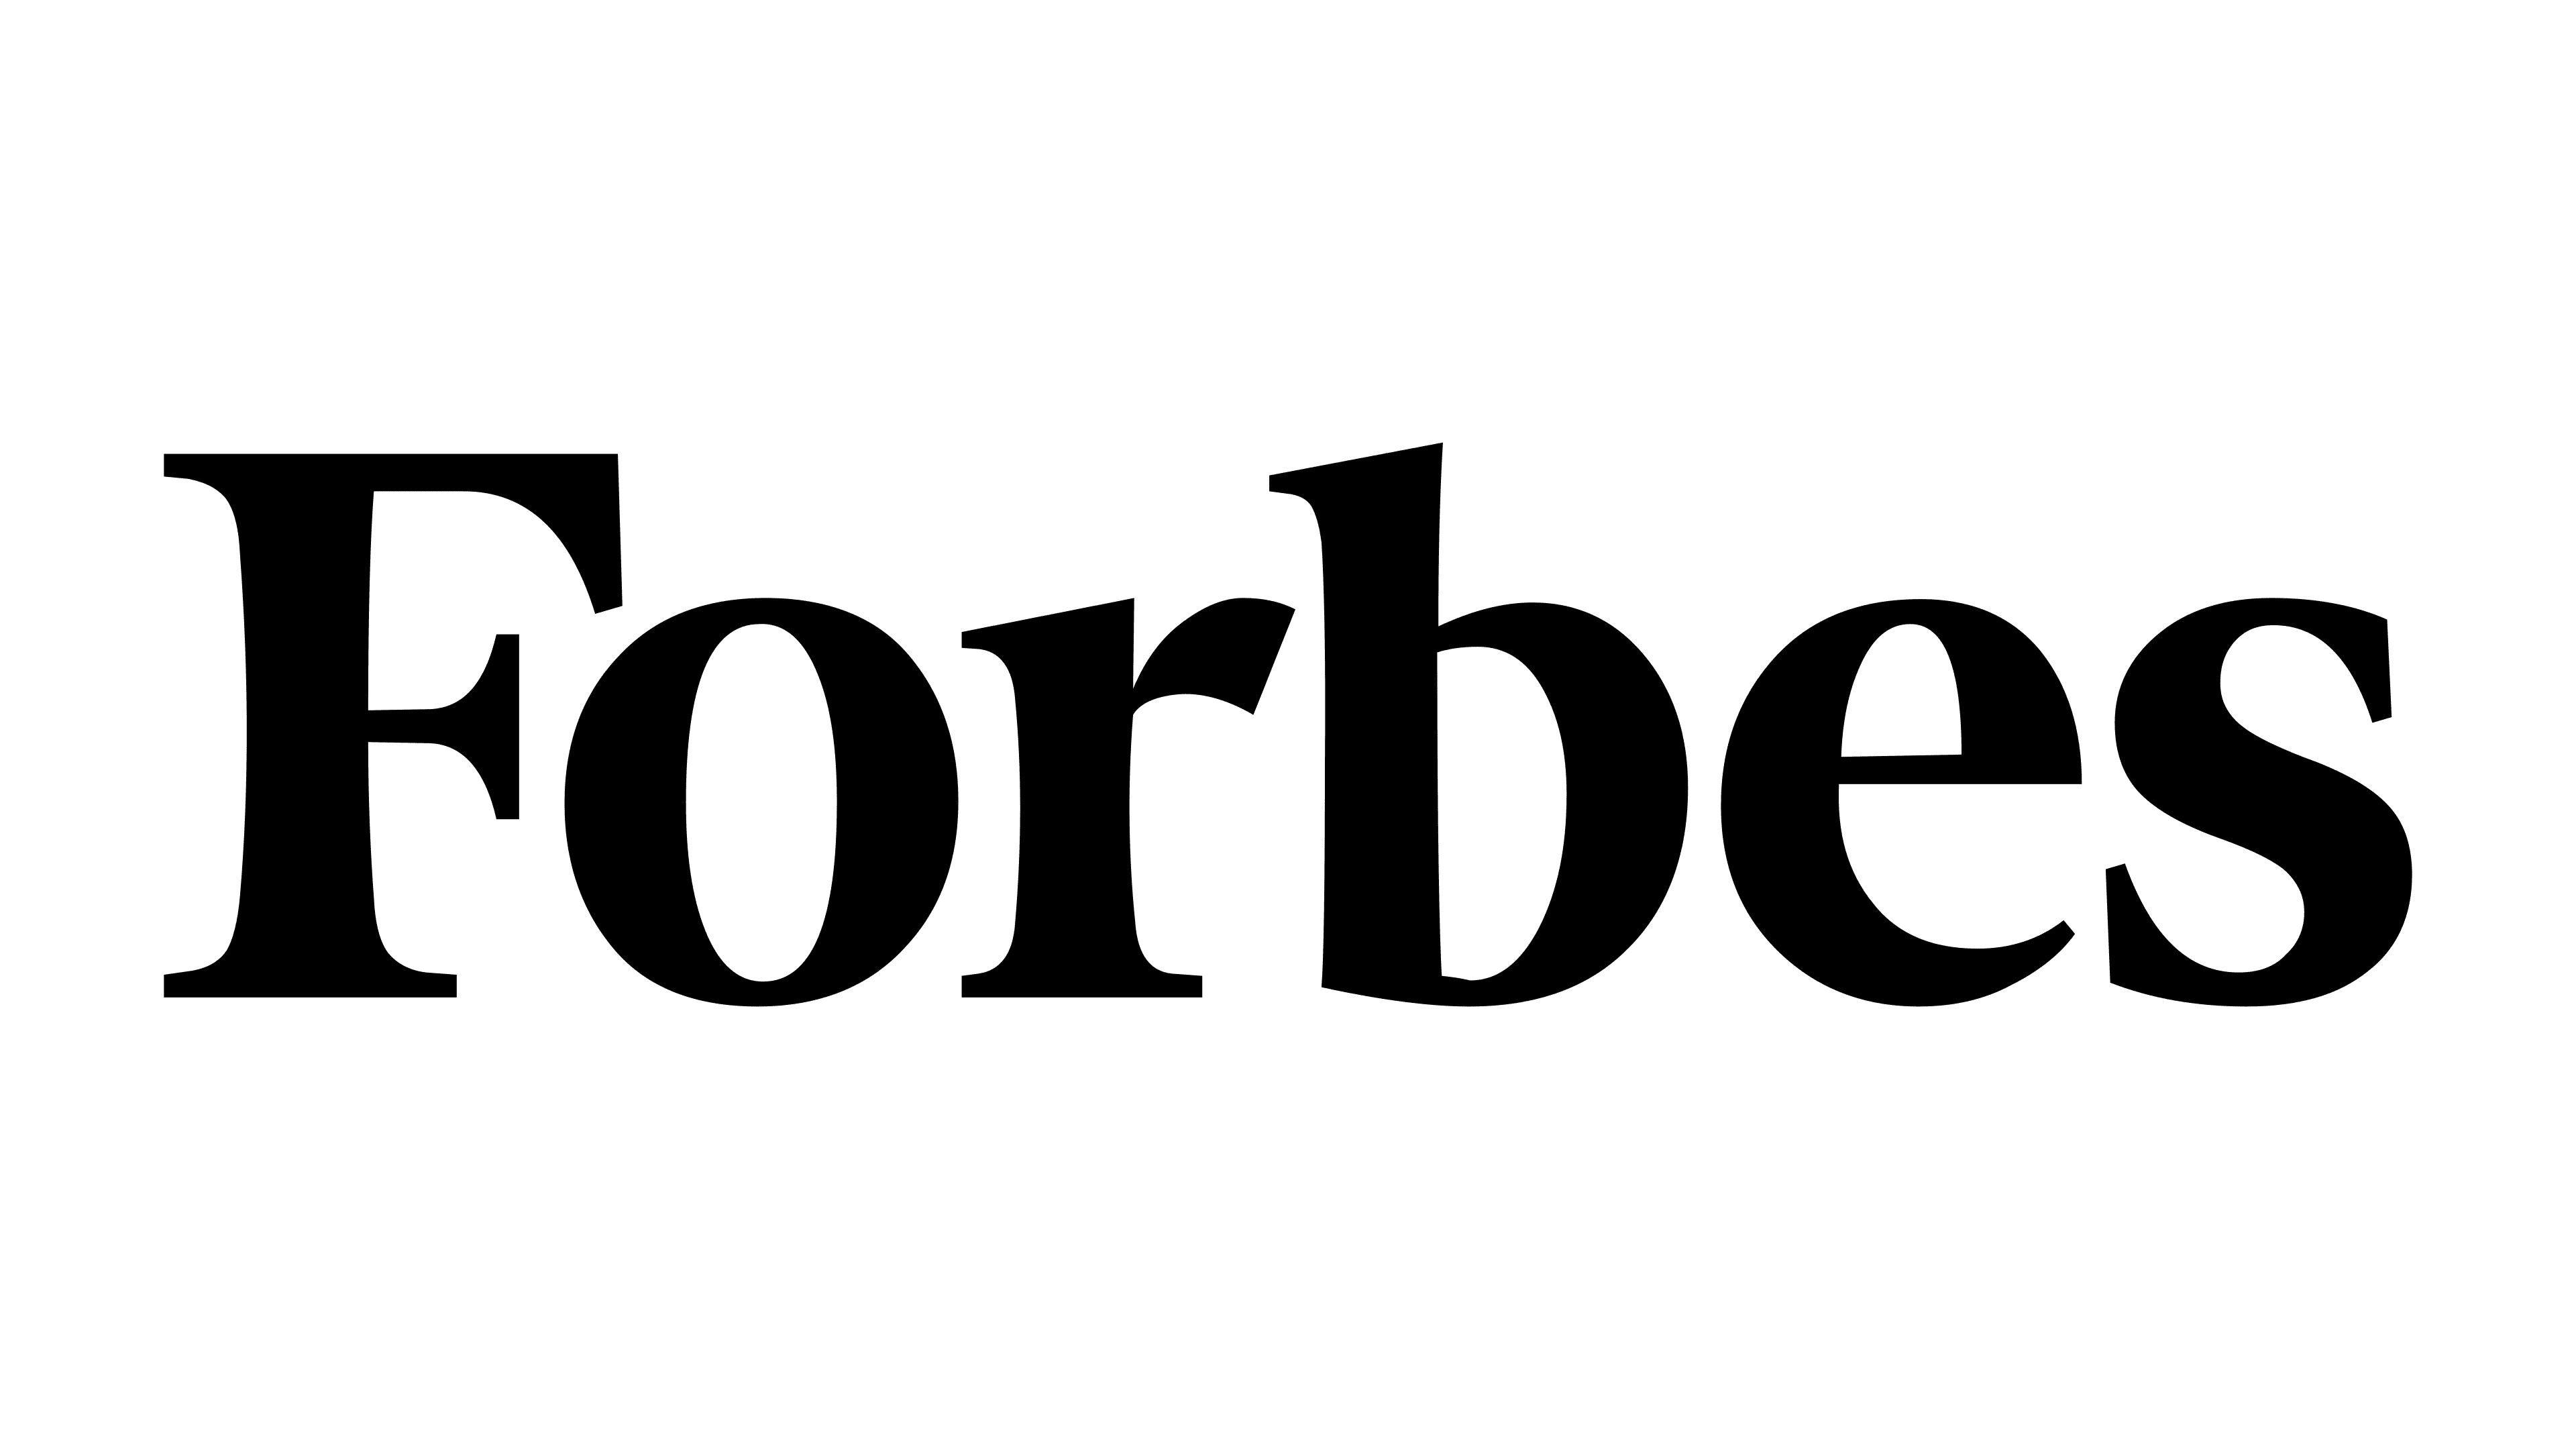 Forbes logo best bees corporate beekeeping media feature